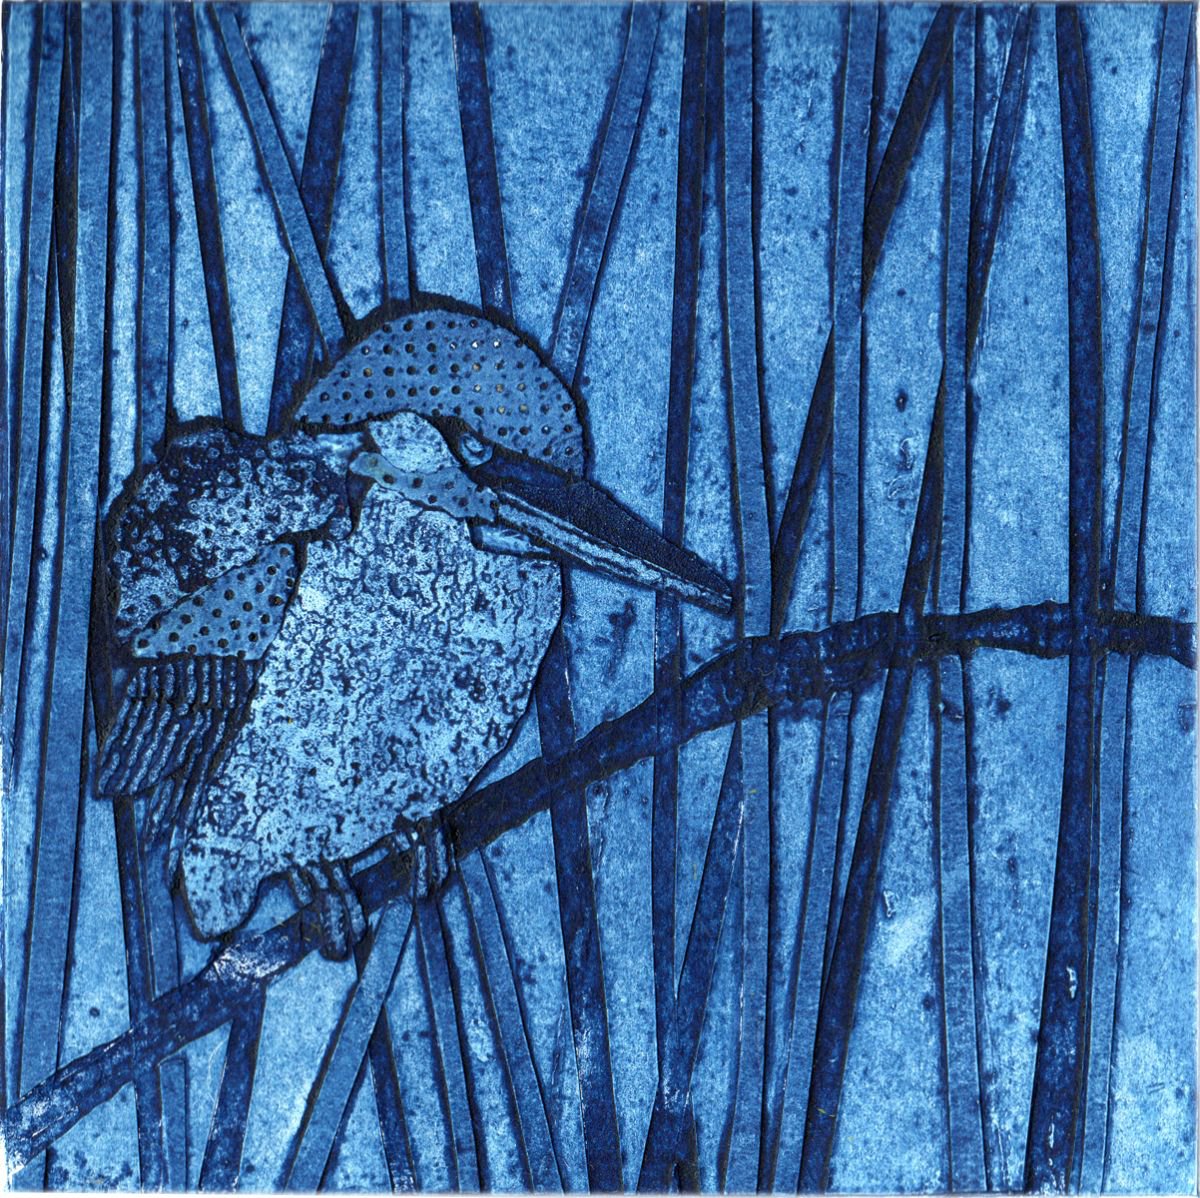 Kingfisher in the Reeds by Drusilla Cole